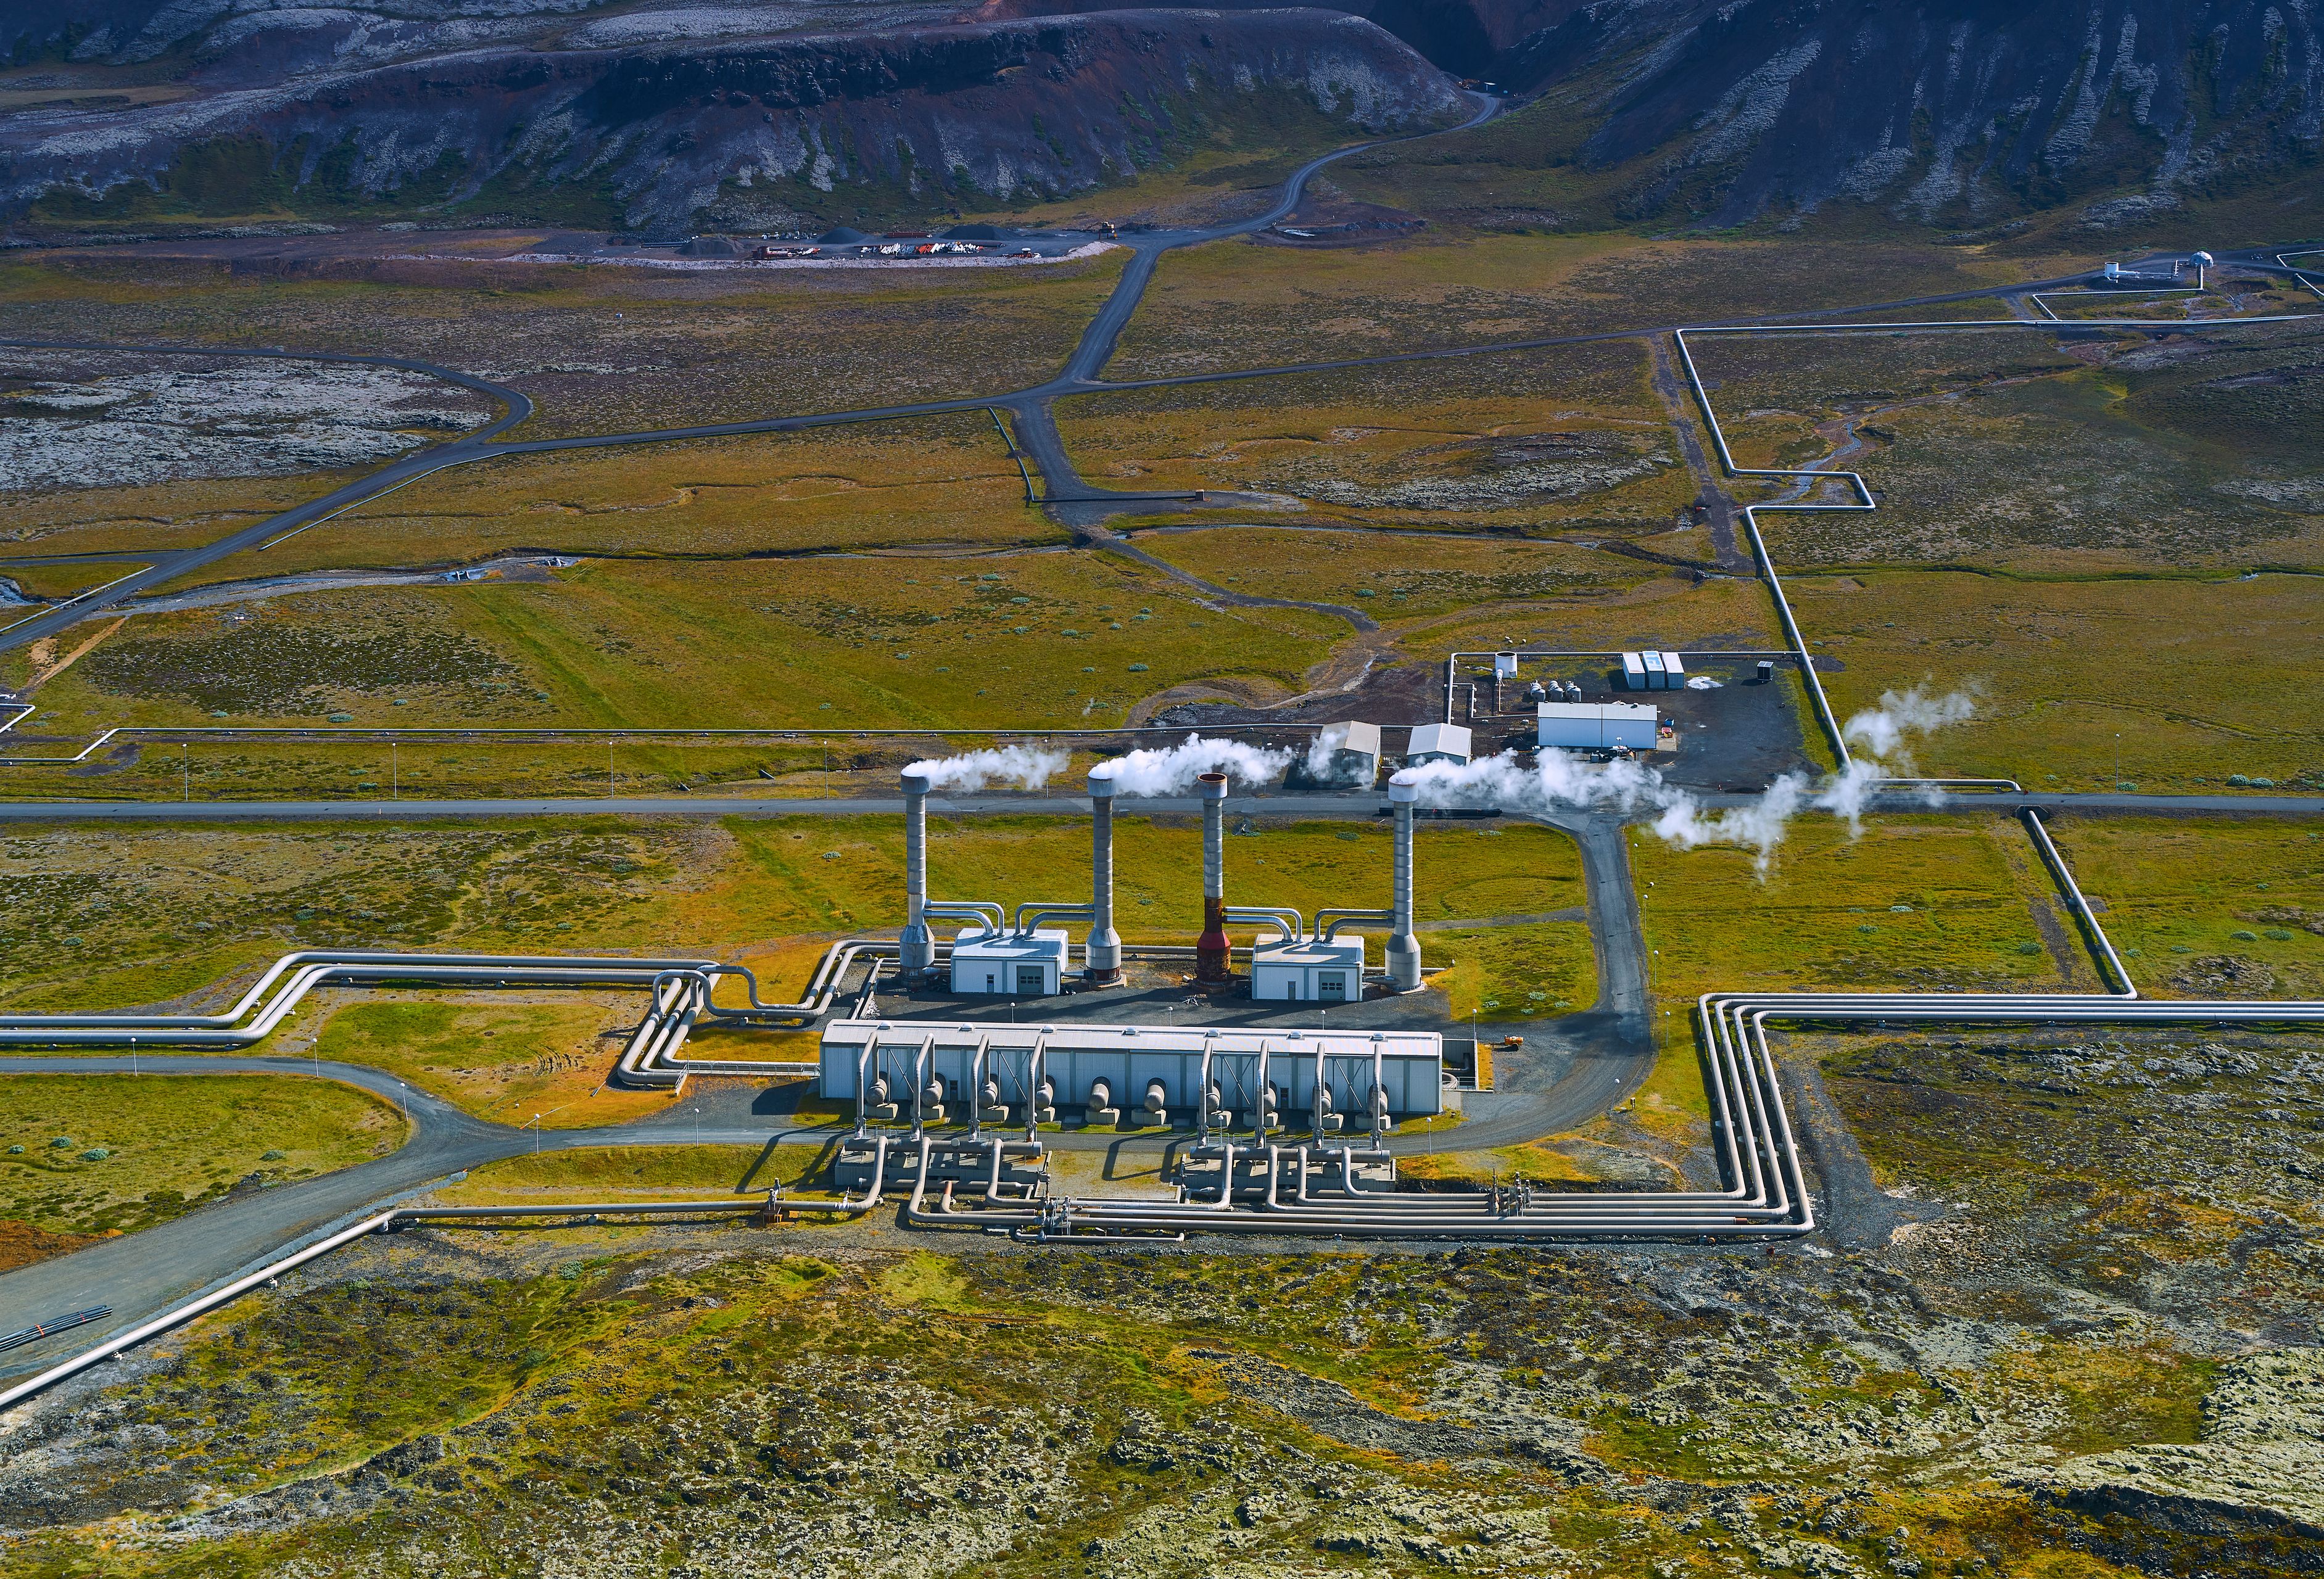 Aerial view of a geothermal power station in the rugged terrain of Iceland